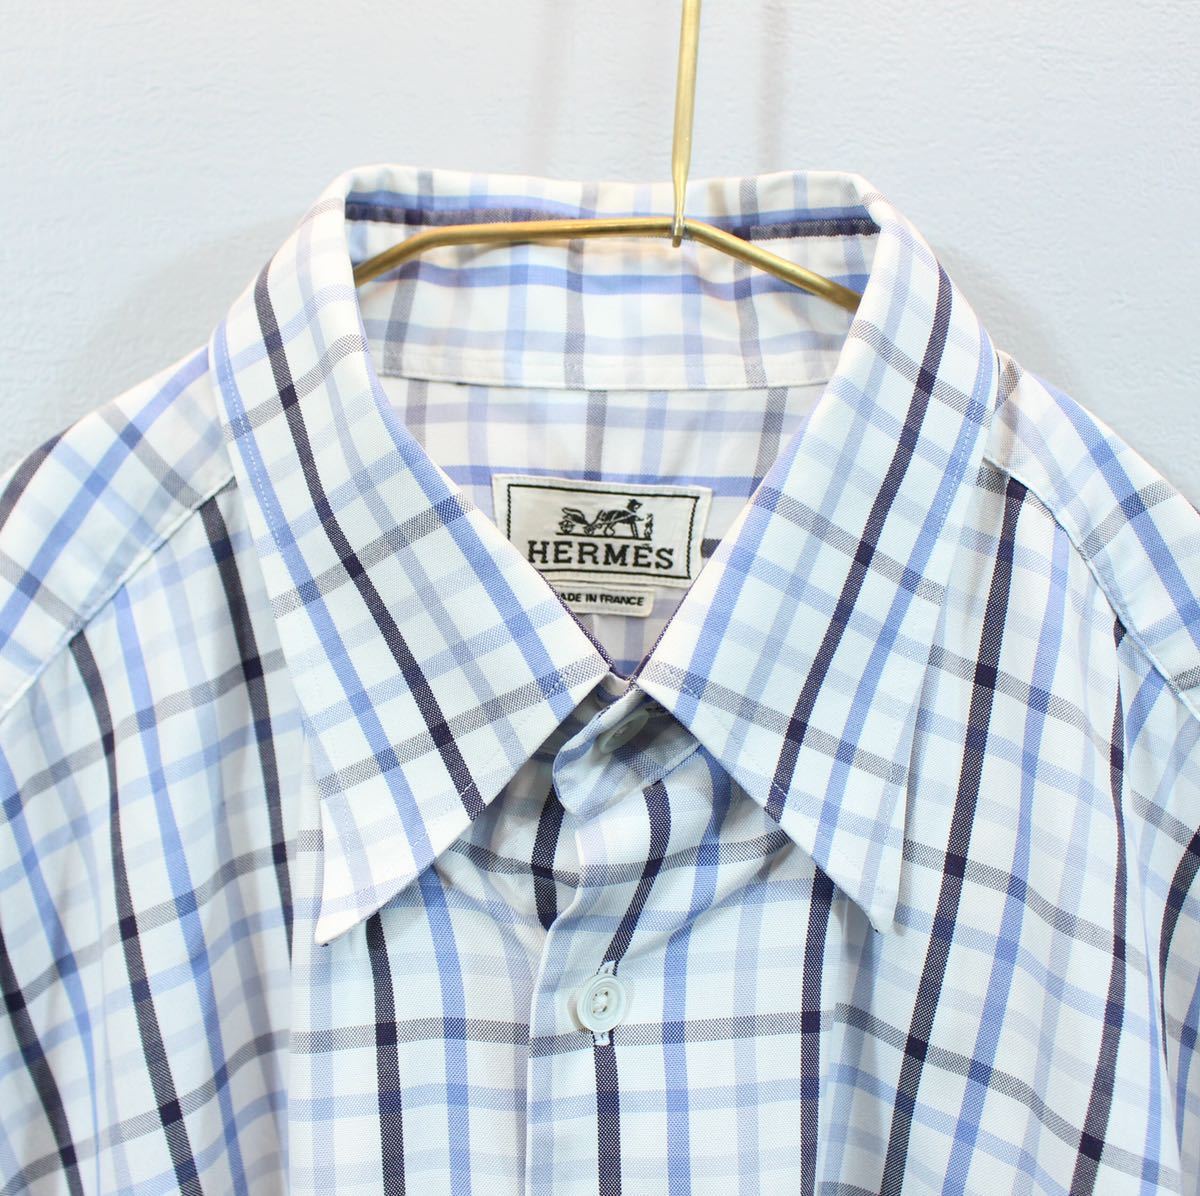 HERMES SERIE BUTTON CHECK PATTERNED LONG SLEEVE SHIRT MADE IN FRANCE/エルメスセリエボタンチェック柄長袖シャツ_画像6